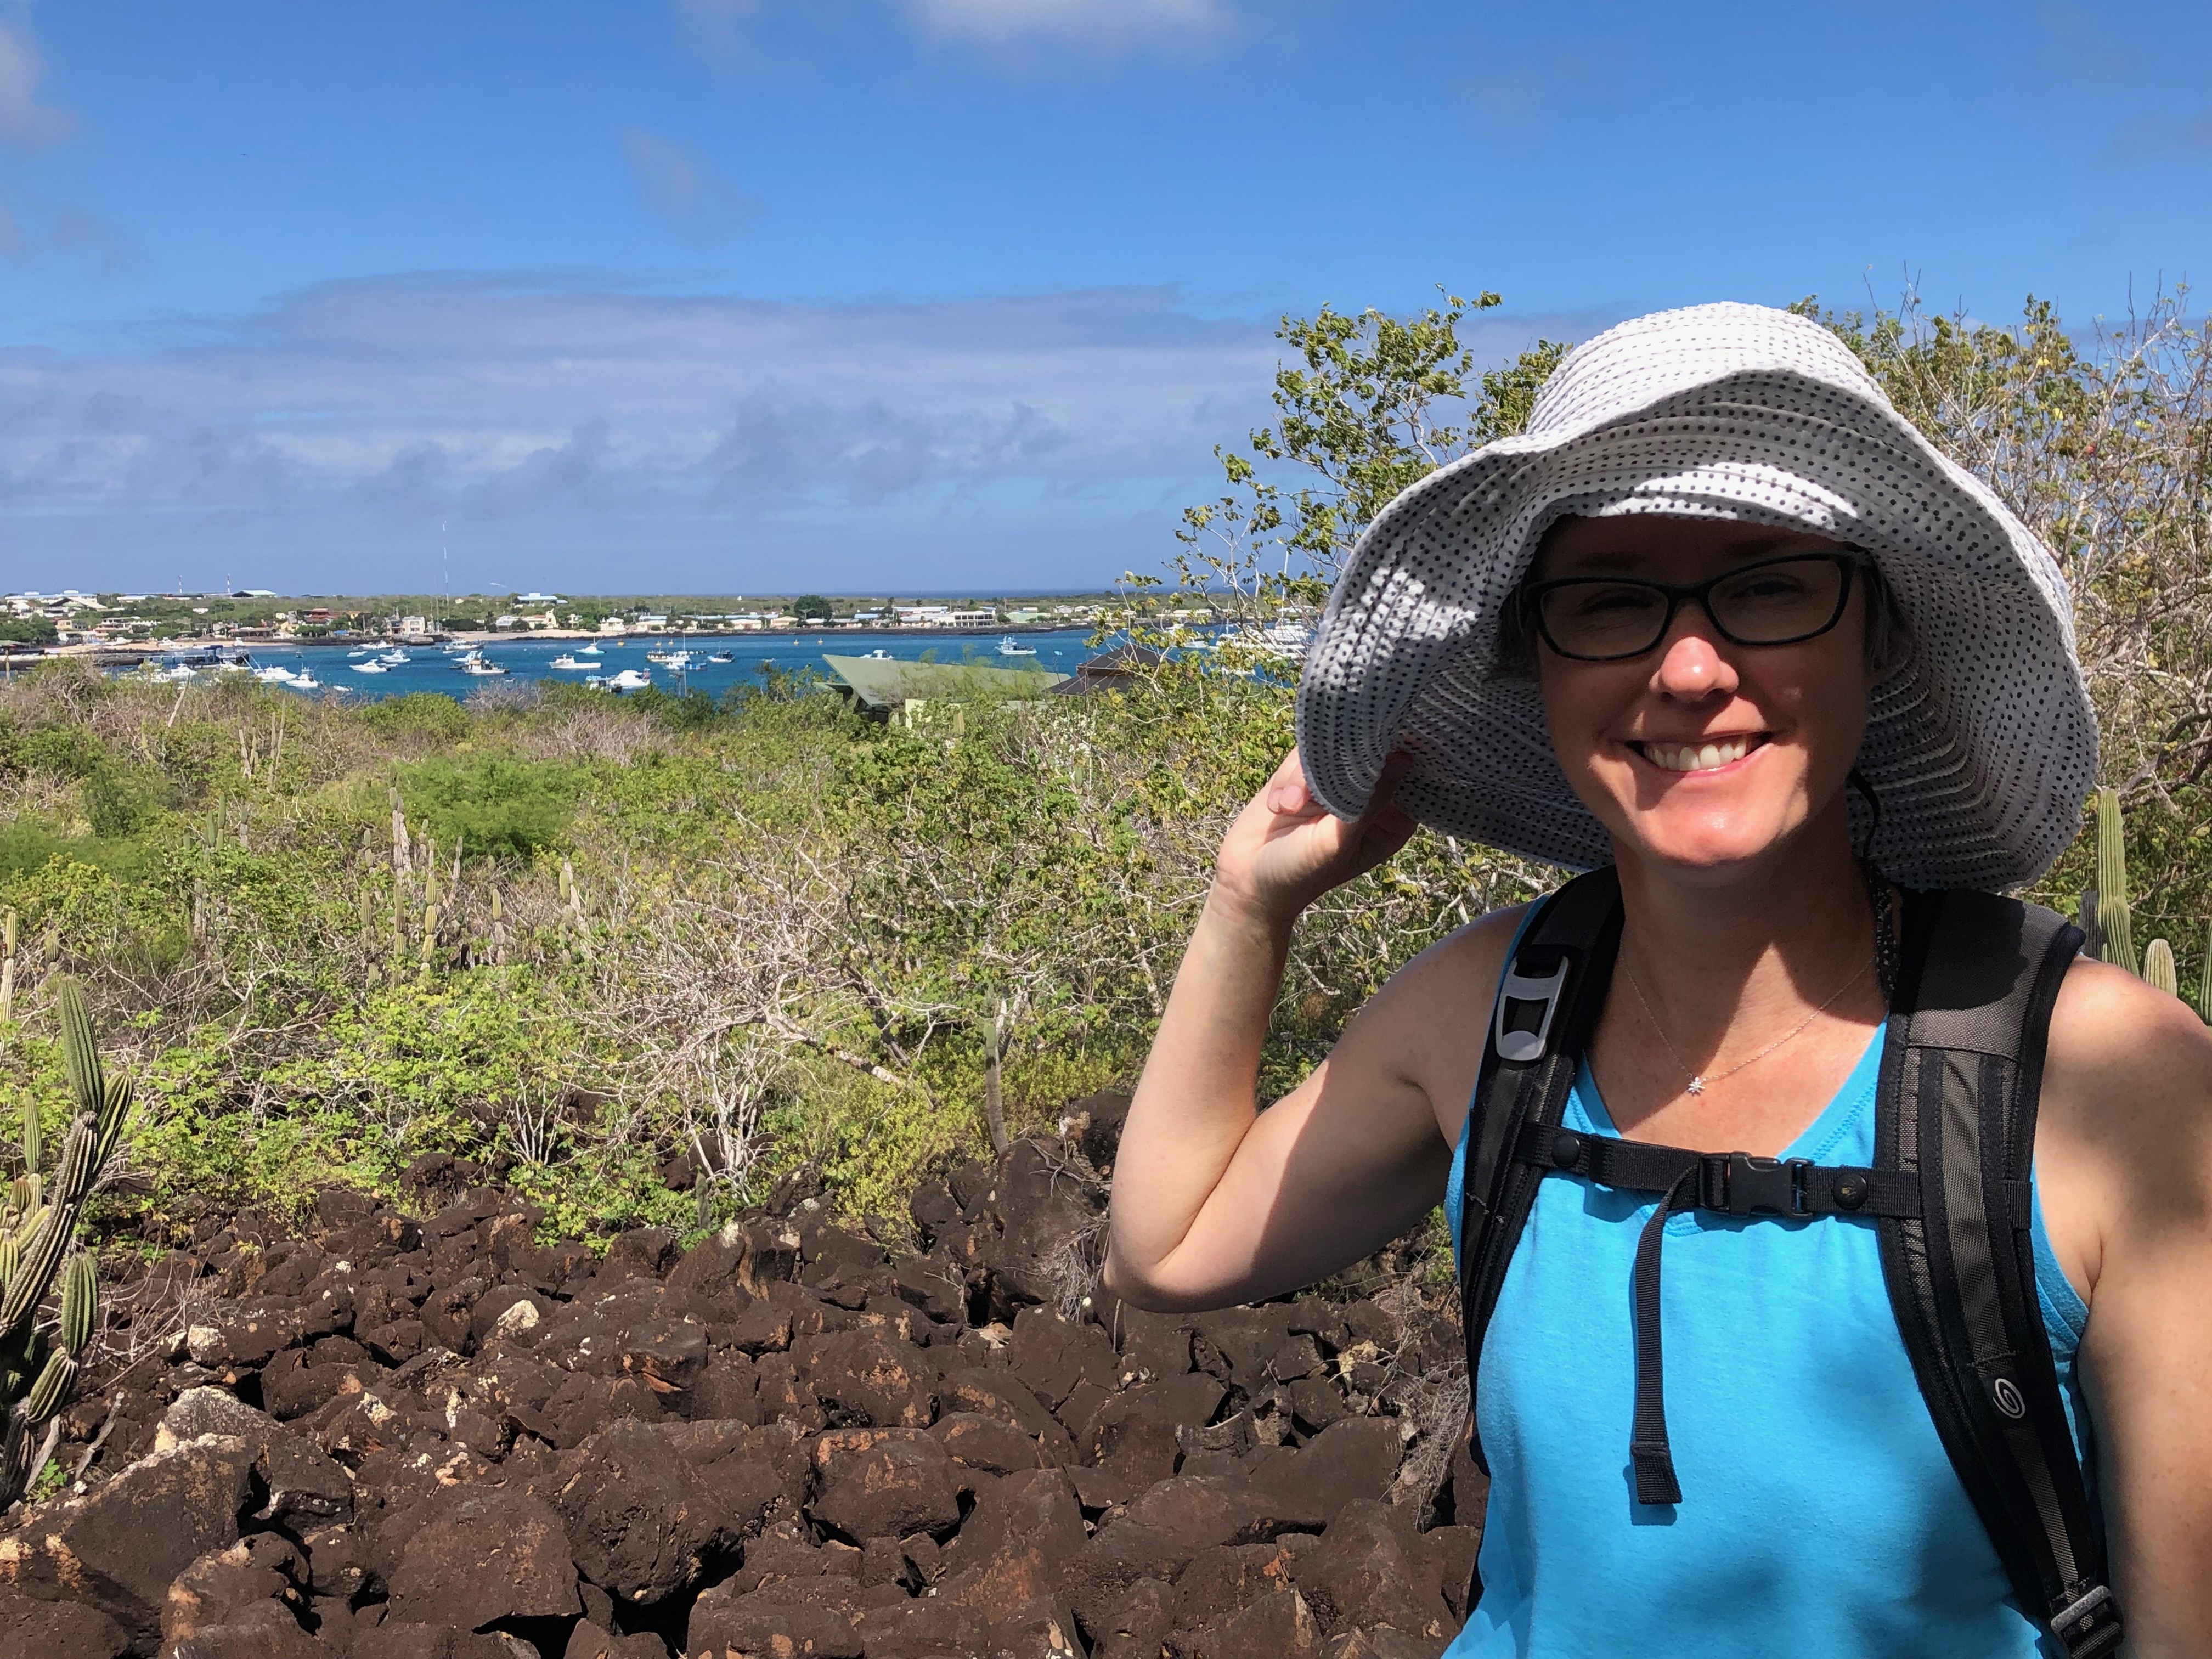 Meg Blanchard went to the Galapagos Islands to provide professional development for teachers